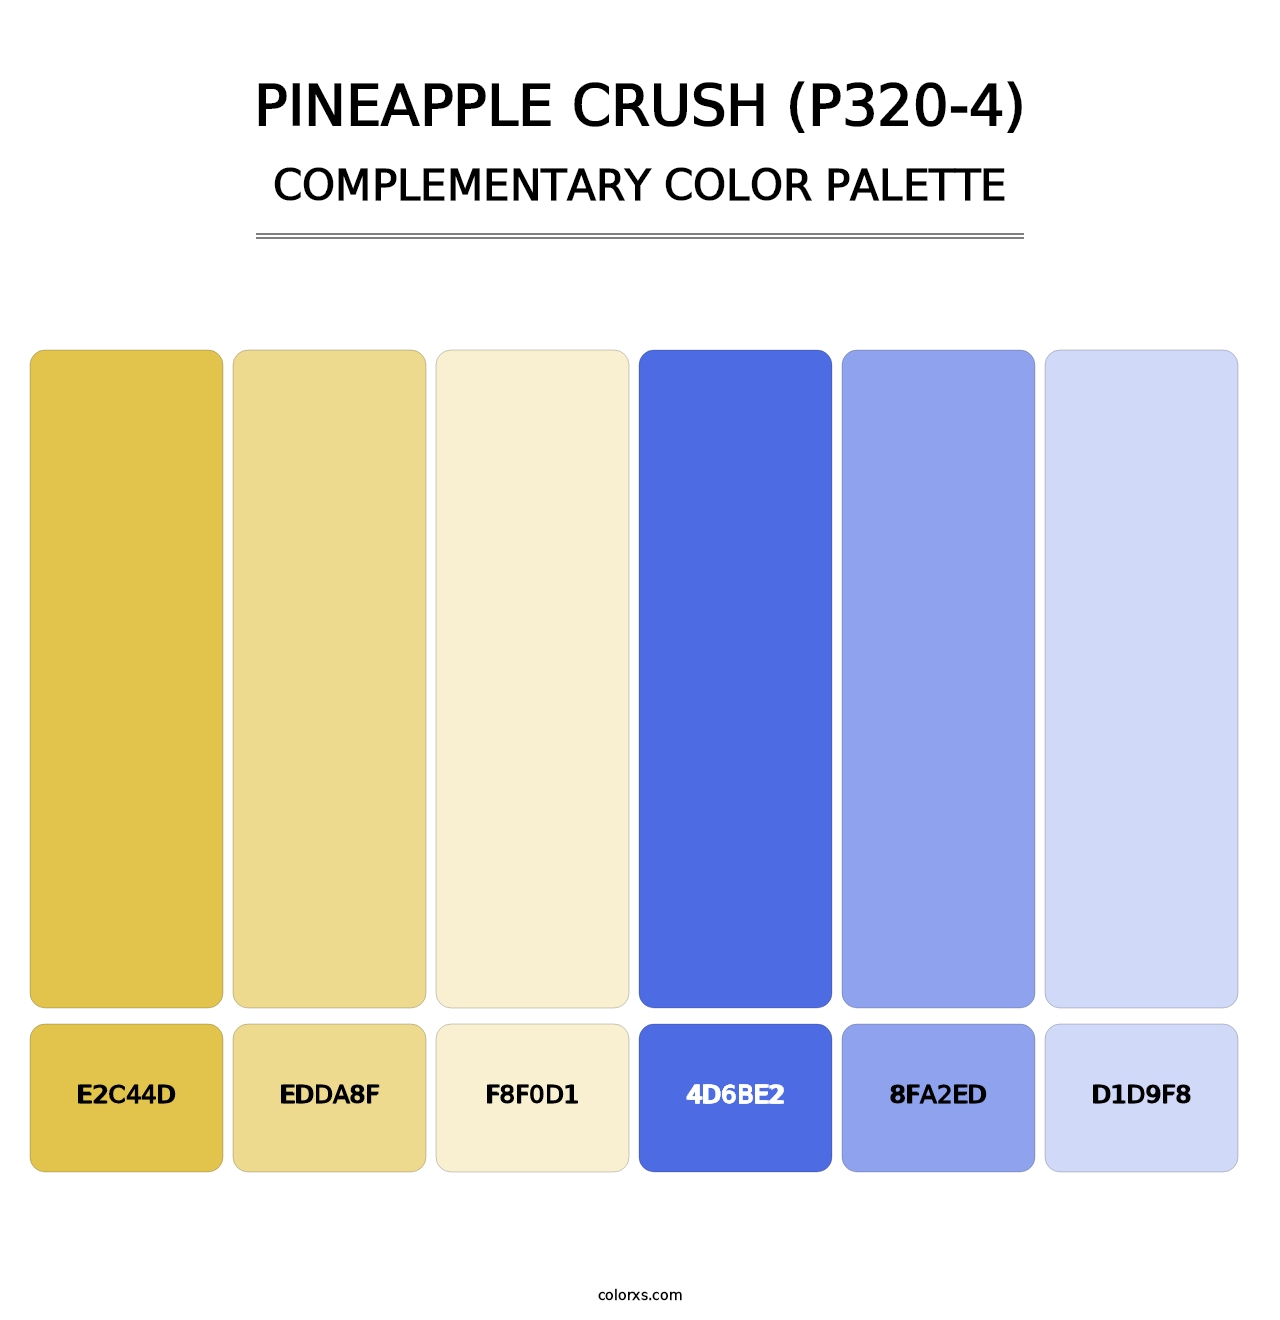 Pineapple Crush (P320-4) - Complementary Color Palette